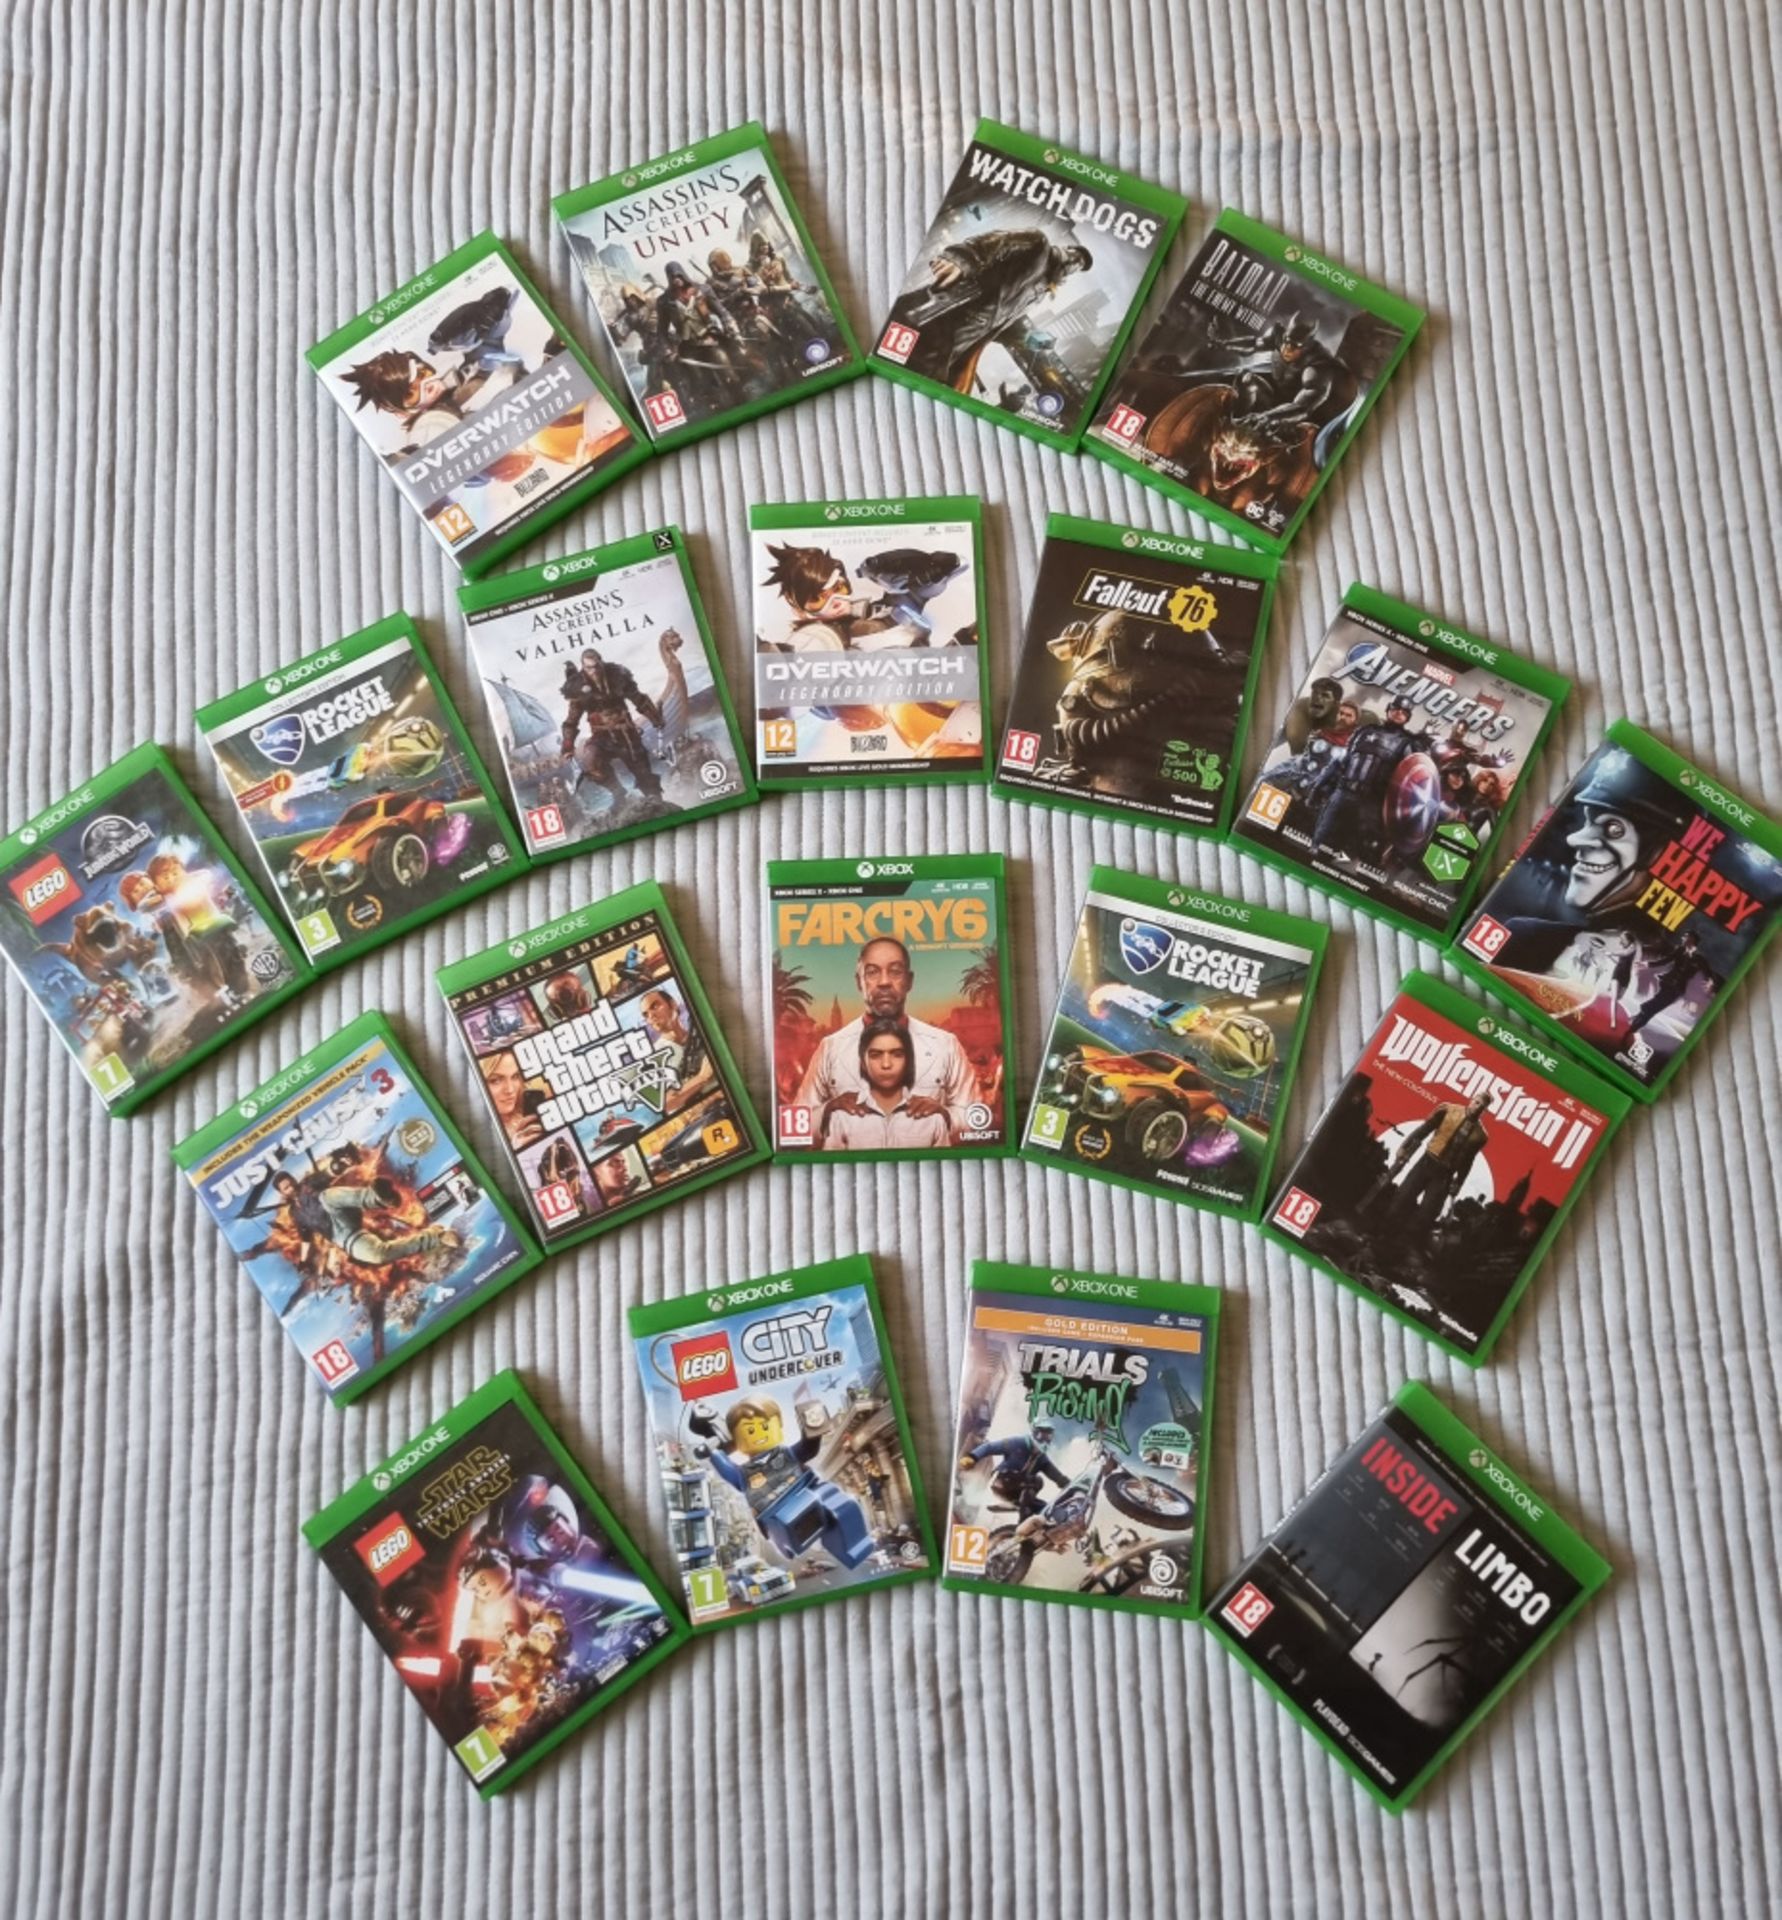 20x Xbox One games to include Grand theft auto V, Far cry 6, Lego Starwars & more